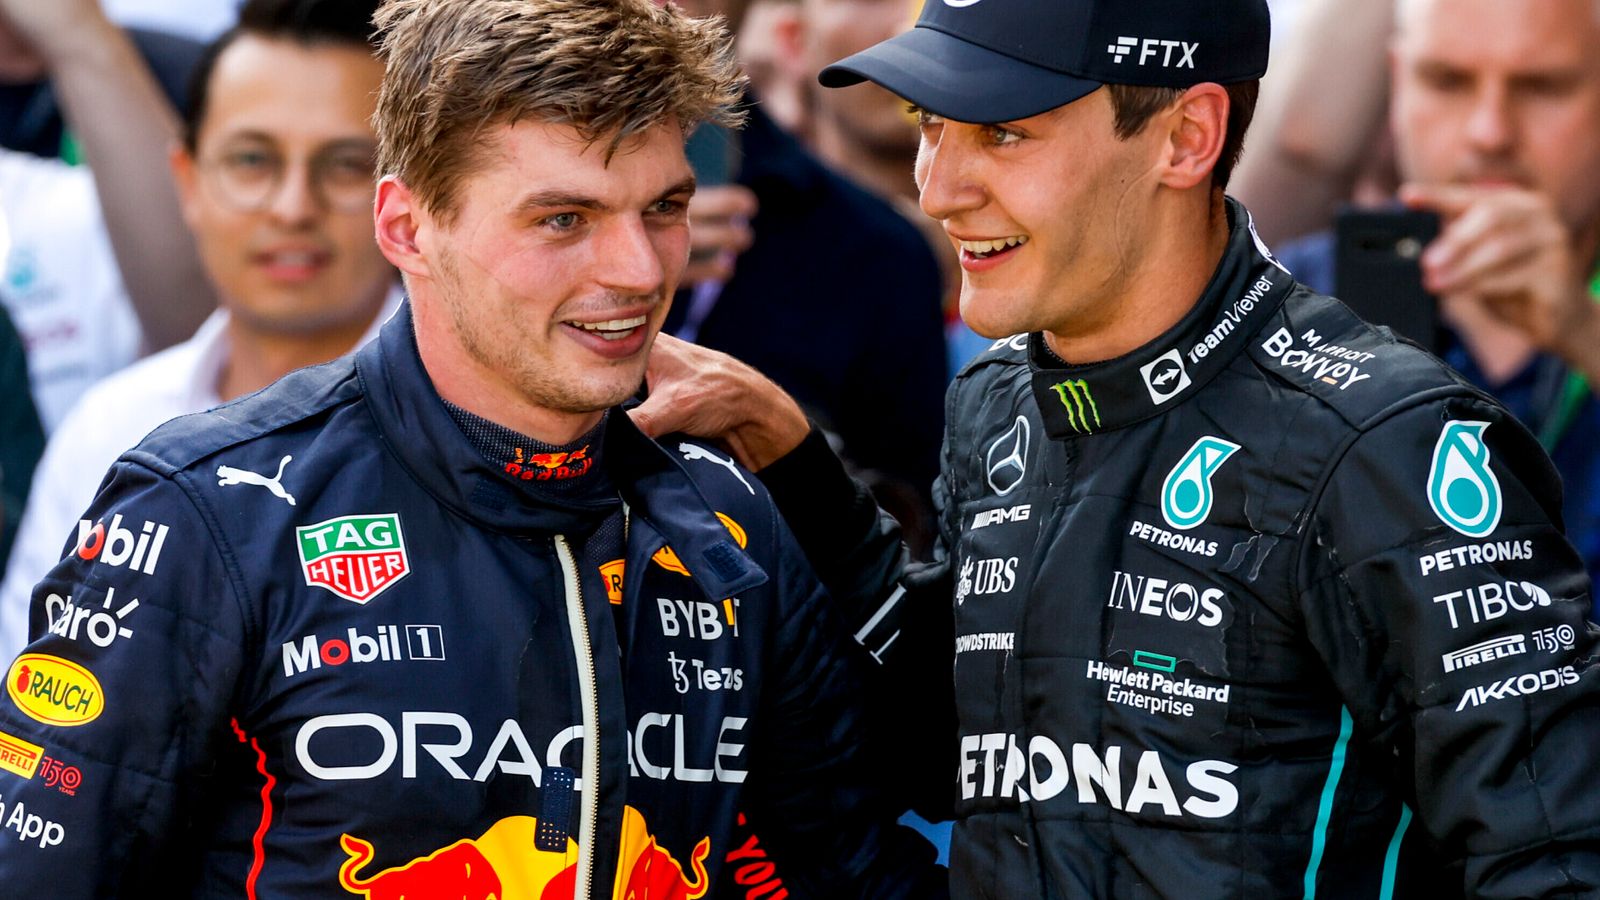 Martin Brundle on Spanish GP: Max Verstappen’s ‘angry’ win, Charles Leclerc’s bad luck and Mercedes back in the fight